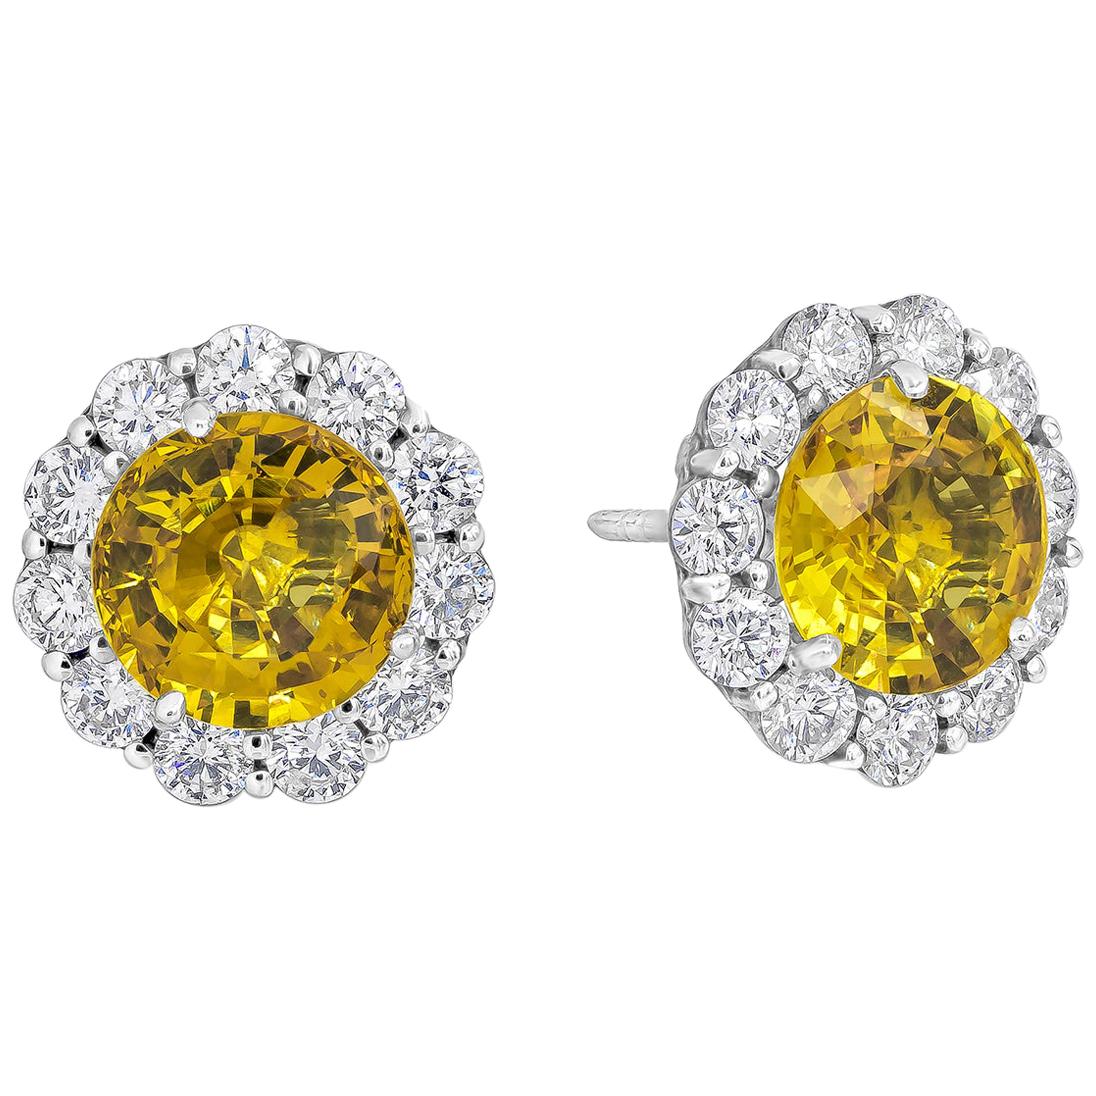 6.94 Carats Total Round Cut Yellow Sapphire and Diamond Halo Stud Earrings For Sale